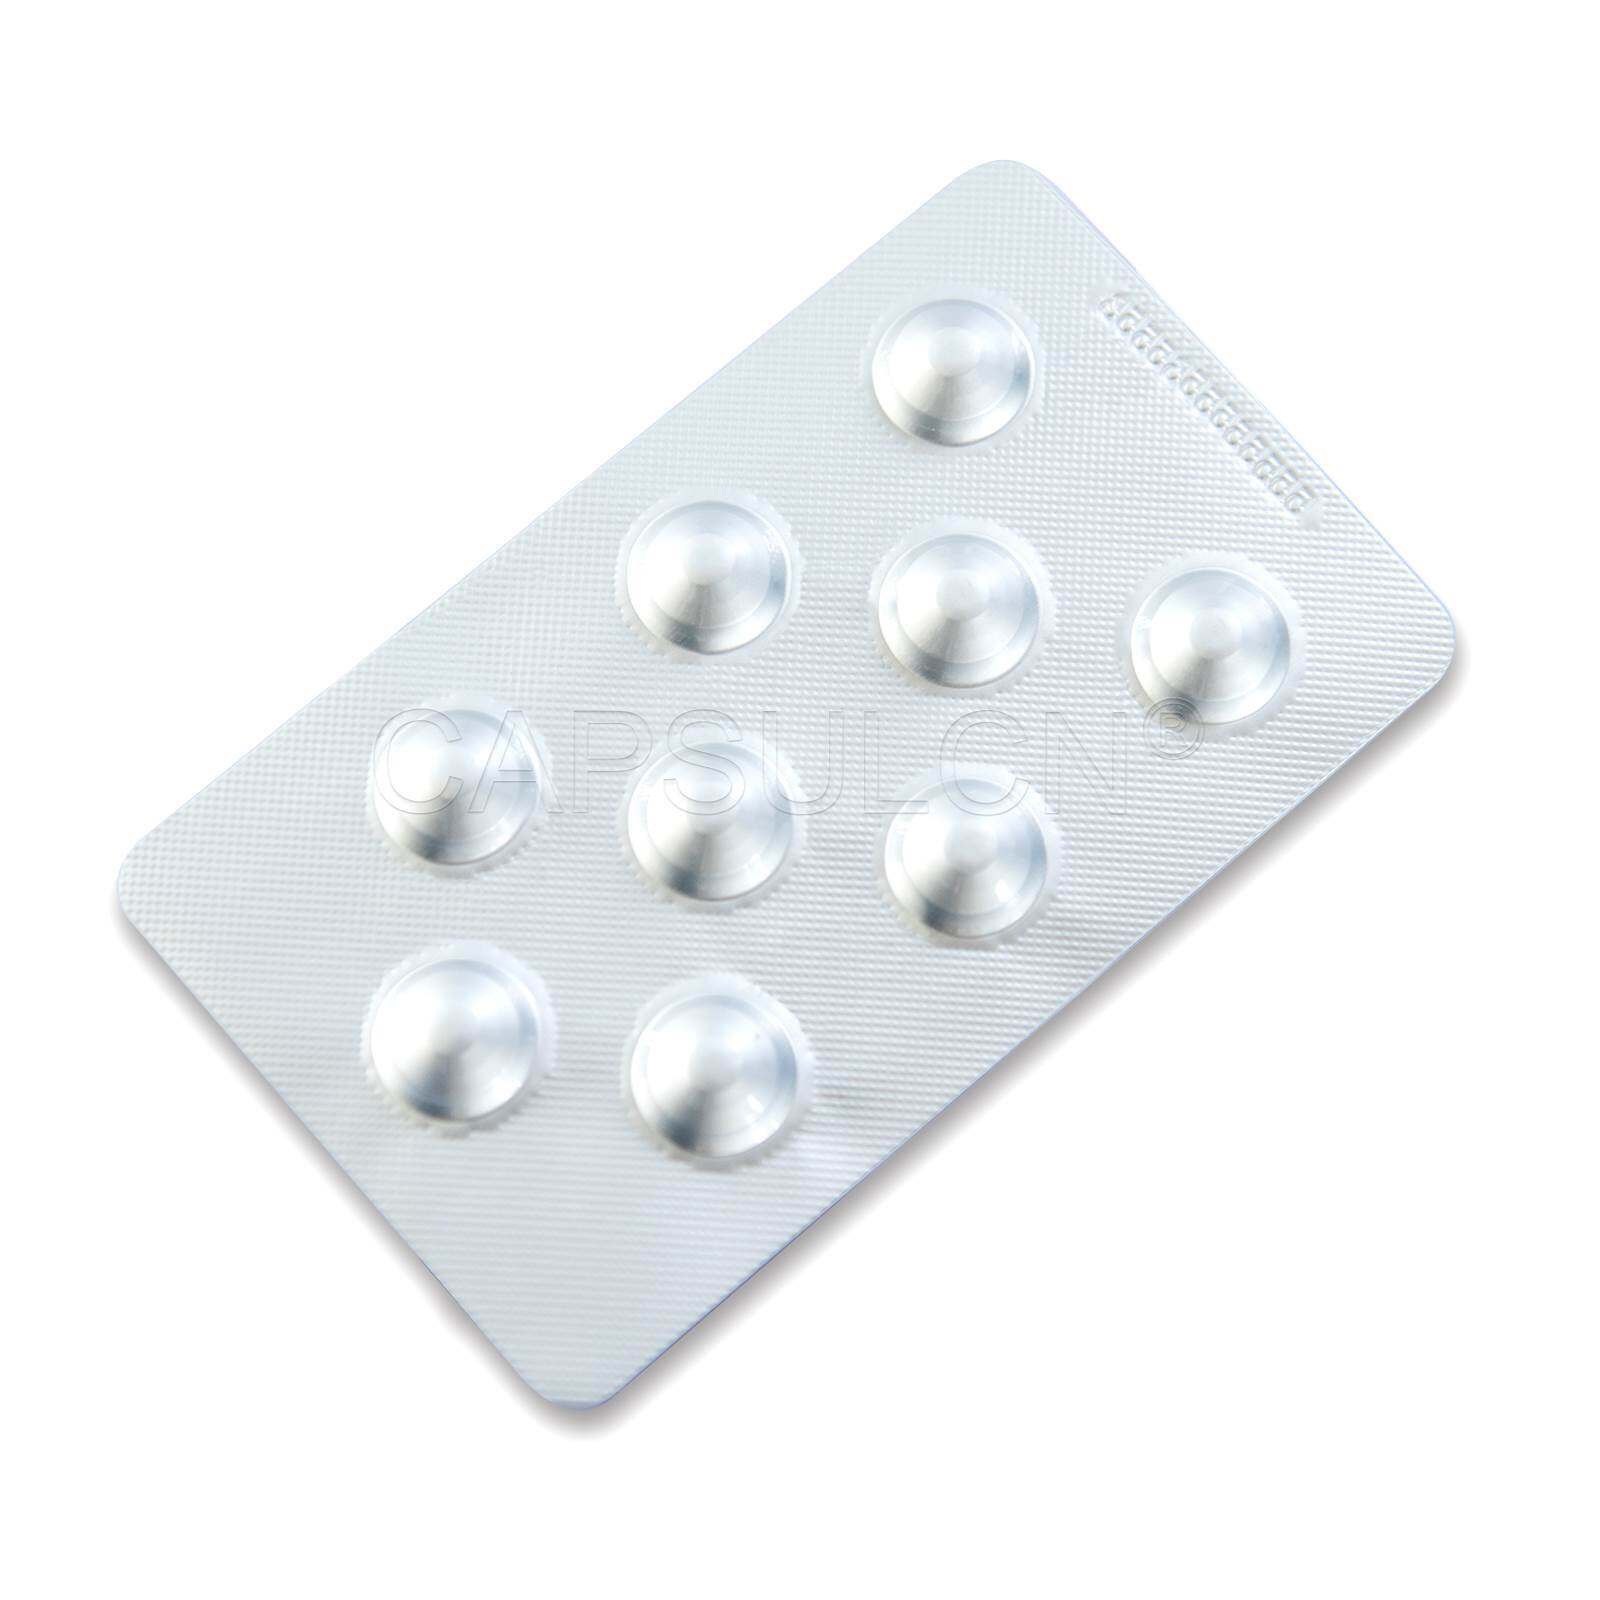 Round Tablet Blister Alu-Alu Packing Sheet with 9 holes